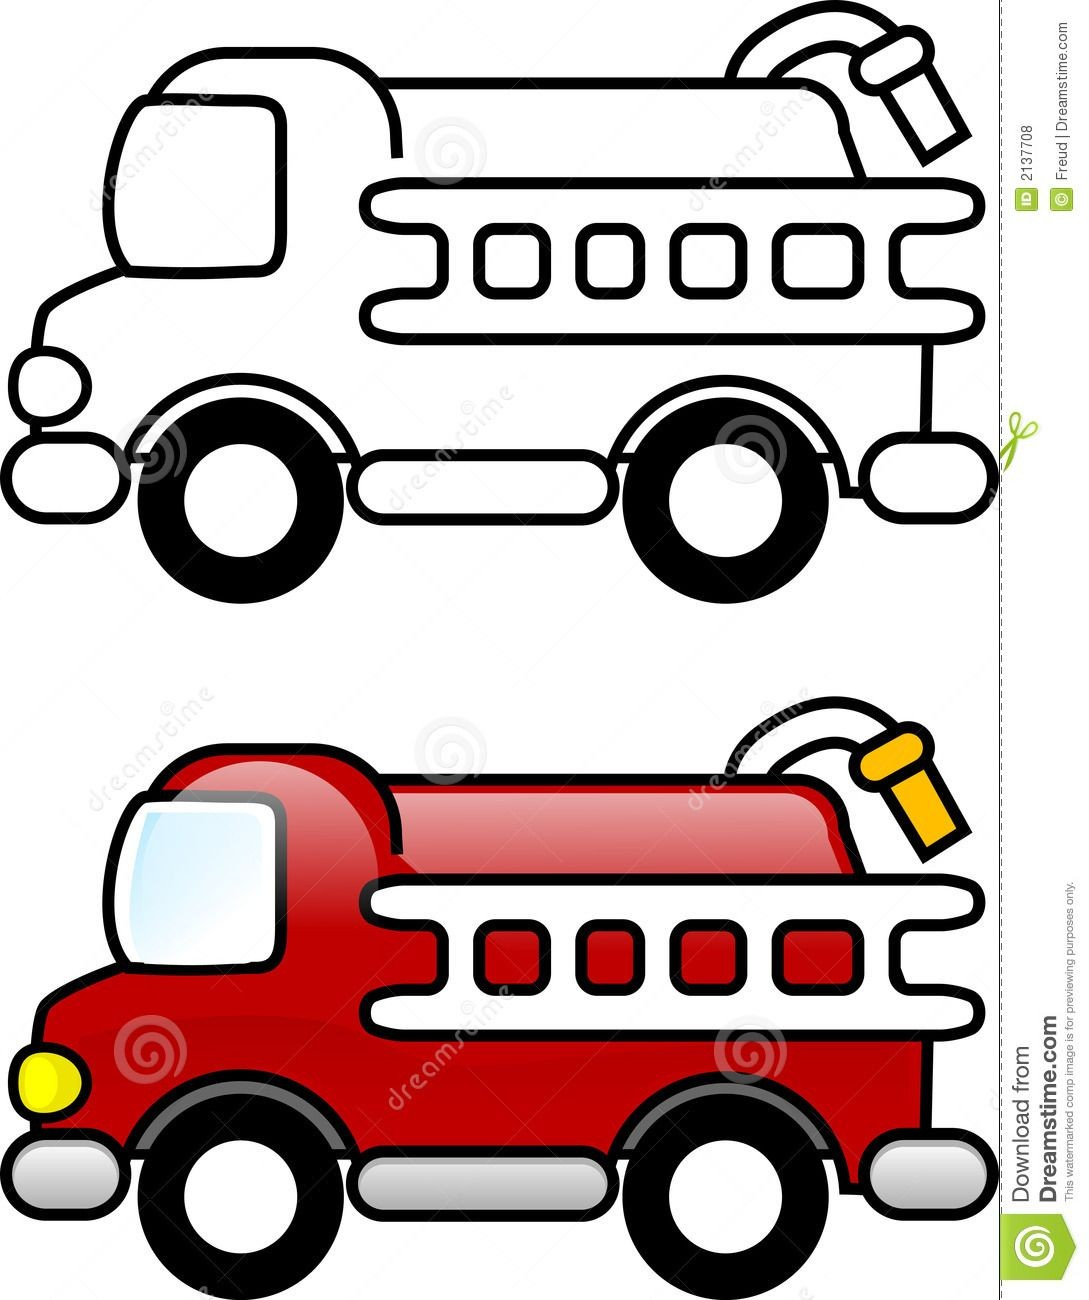 Truck Coloring Pages For Preschoolers Fresh Preschool Dump Truck Coloring Page Lovespells